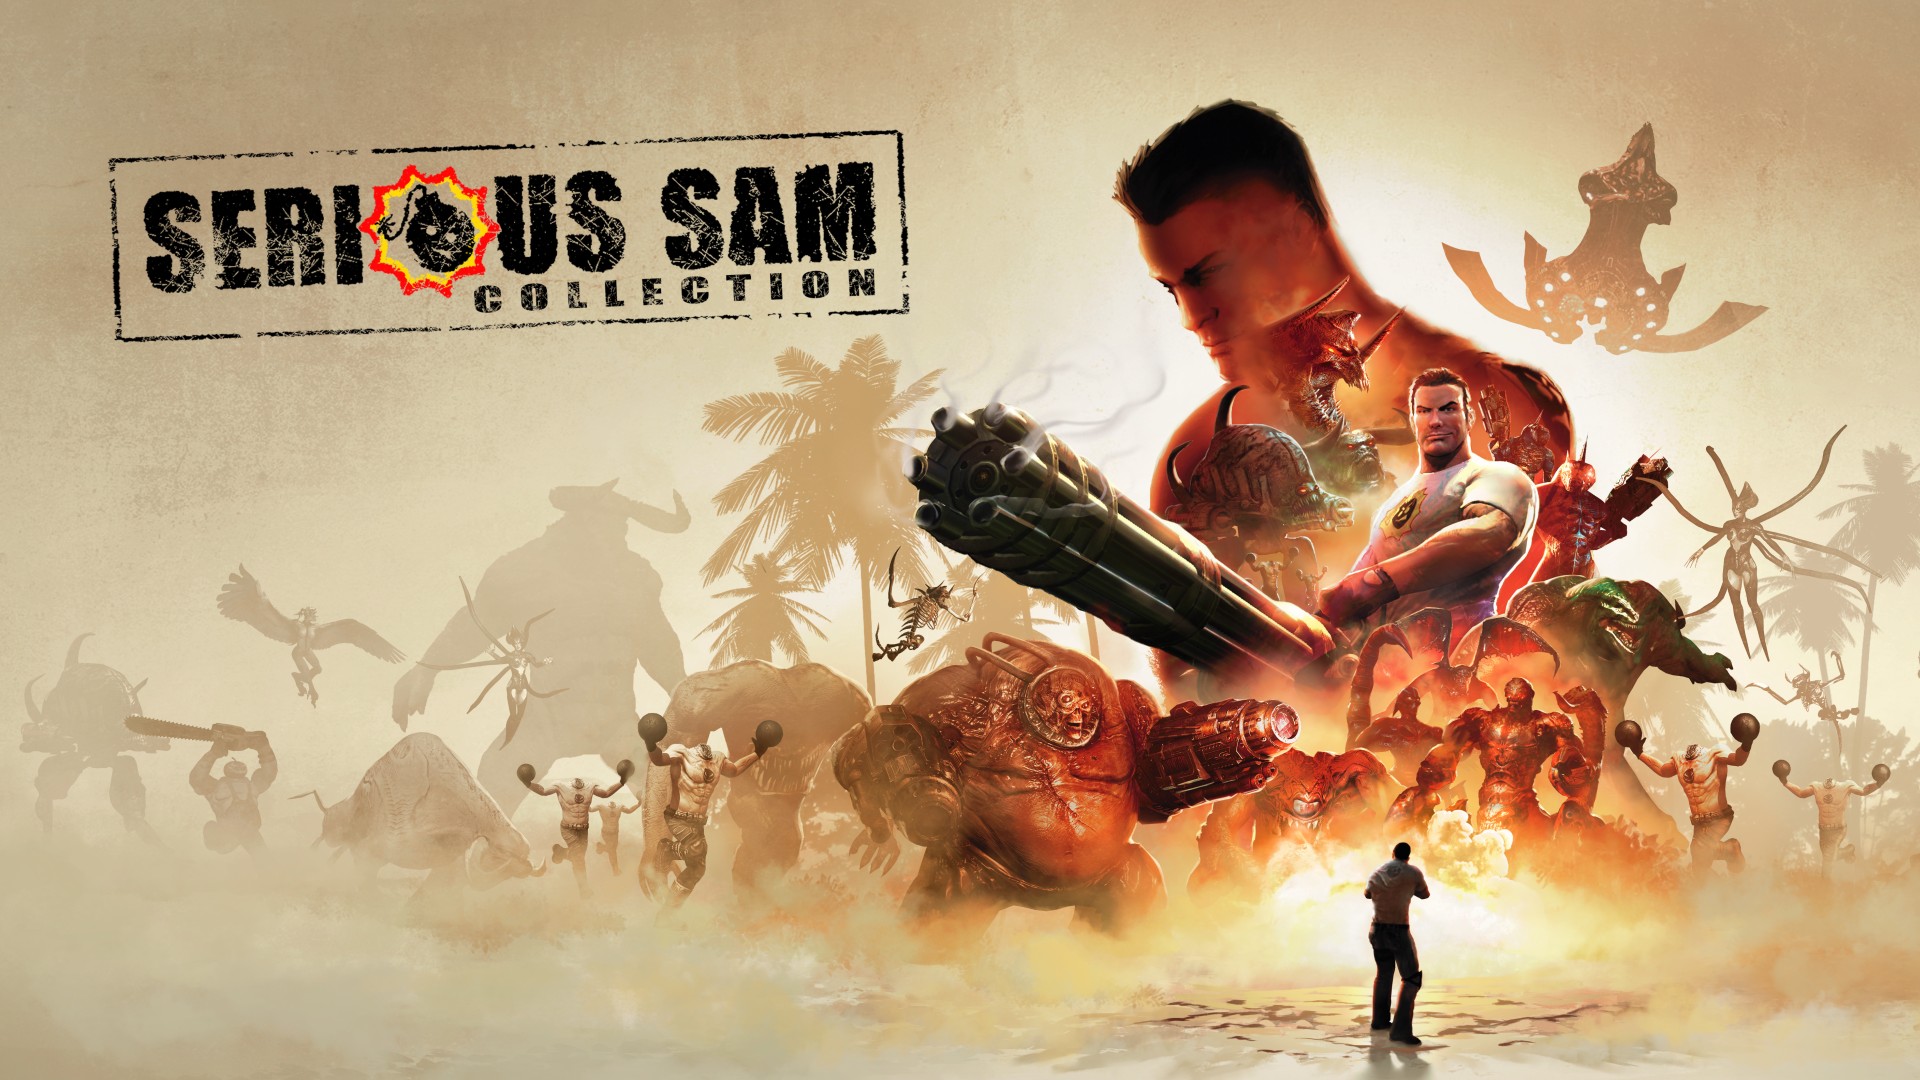 Video For Serious Sam Collection Delivers Endless Fun and Explosions